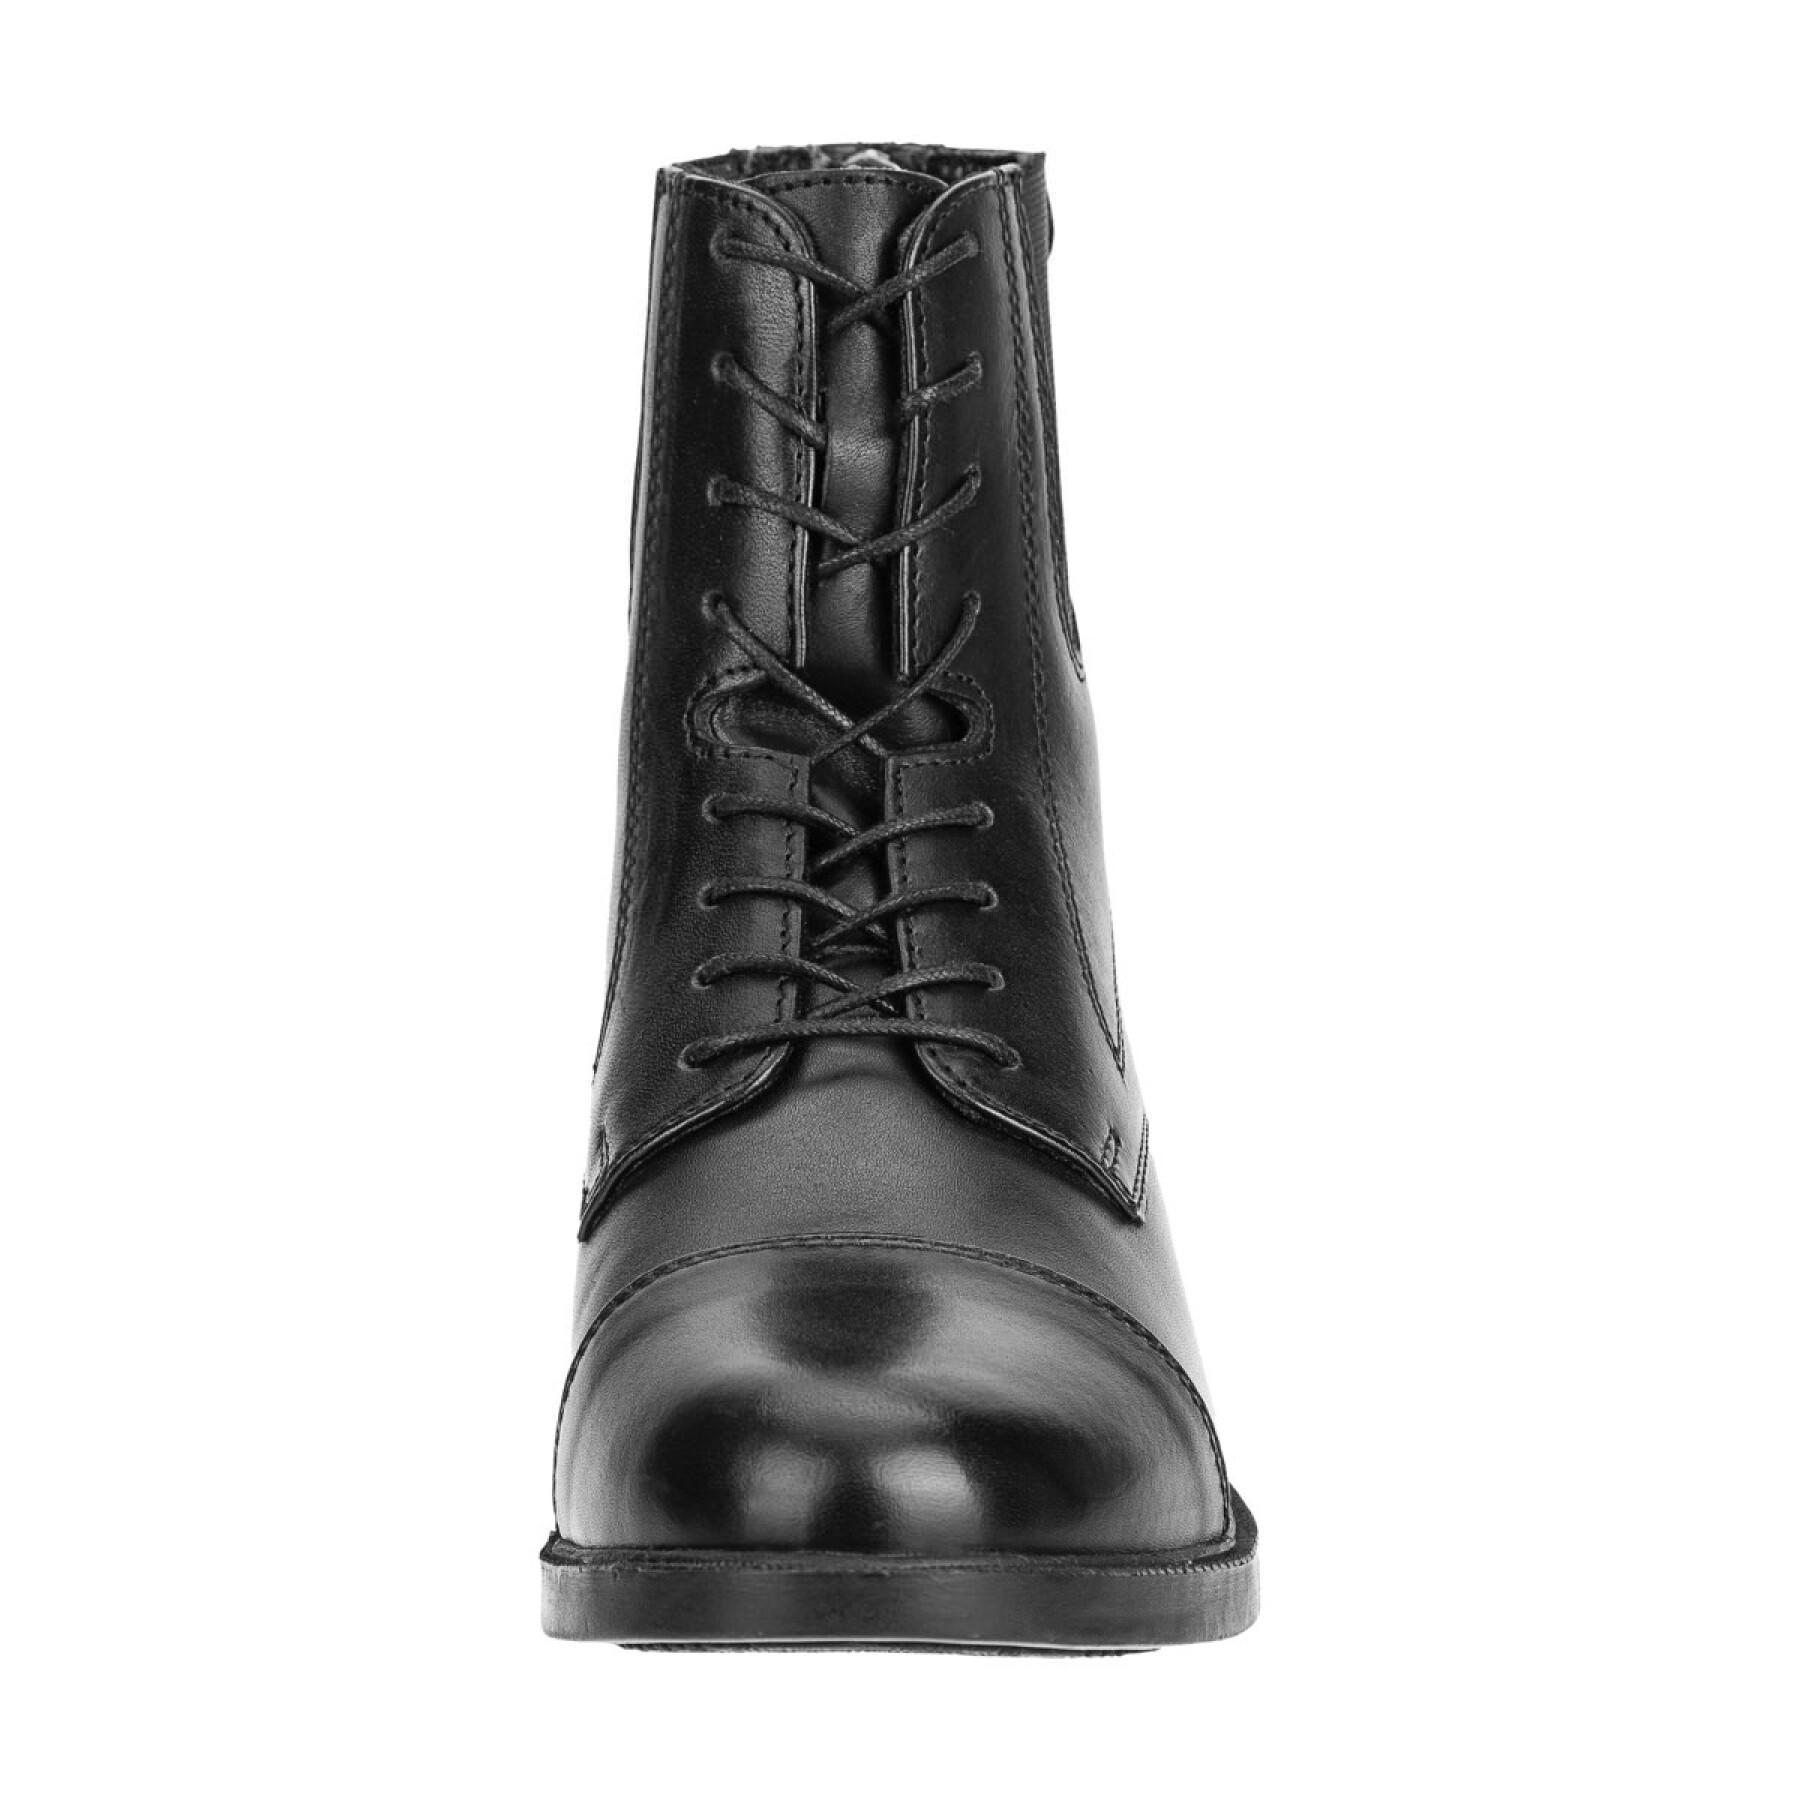 Vegan leather riding boots for kids Suedwind Footwear Contrace